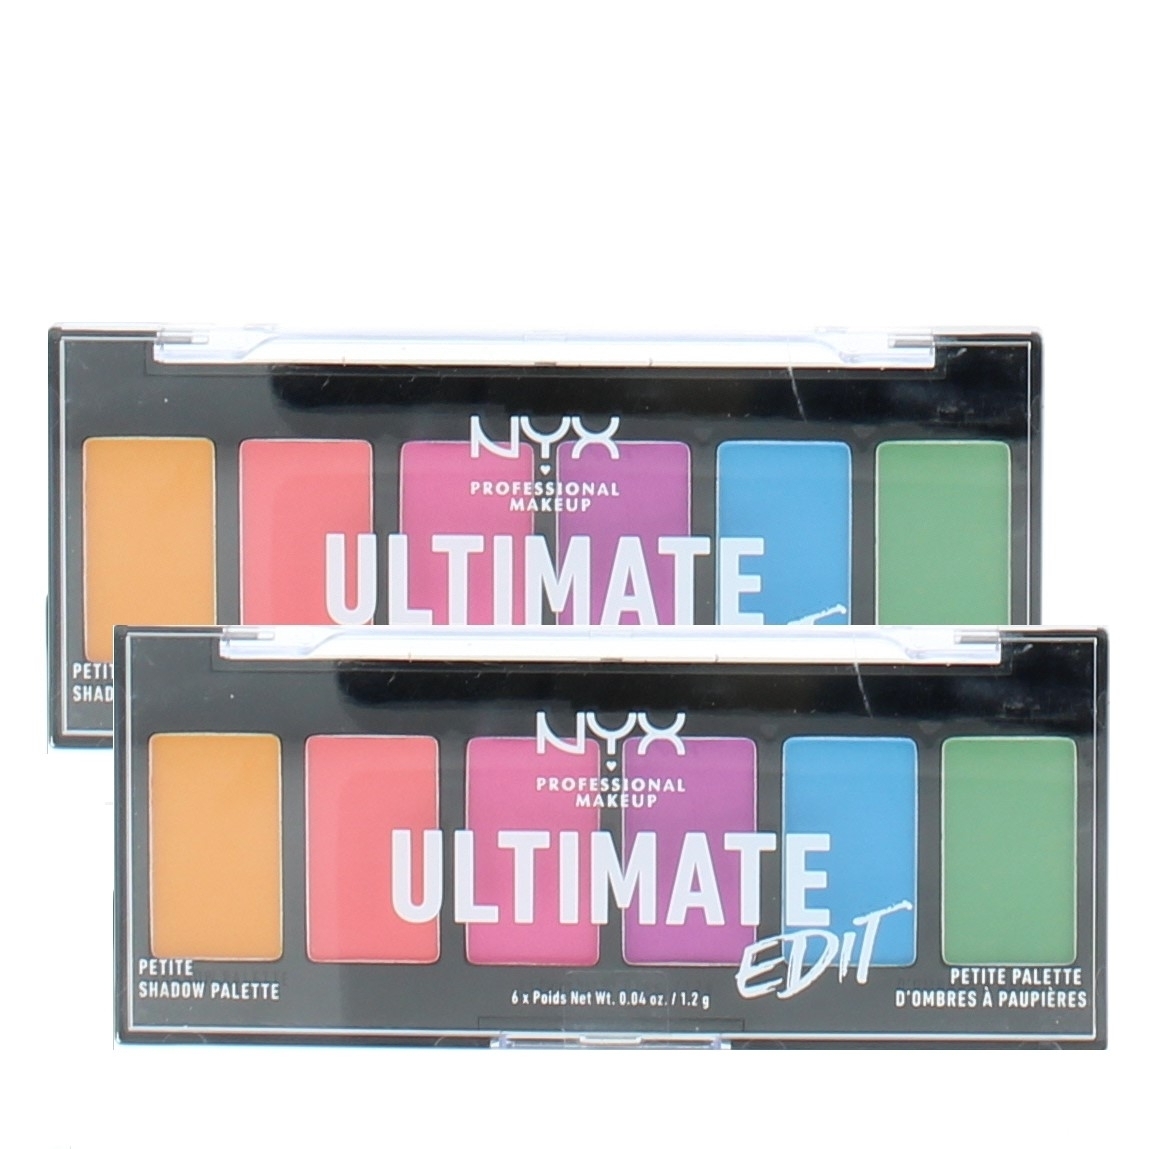 NYX Professional Makeup Ultimate Edit Petite Shadow Palette- Brights (6 Shades X 0.04oz) 0.24oz/7.2g (2 Pack)